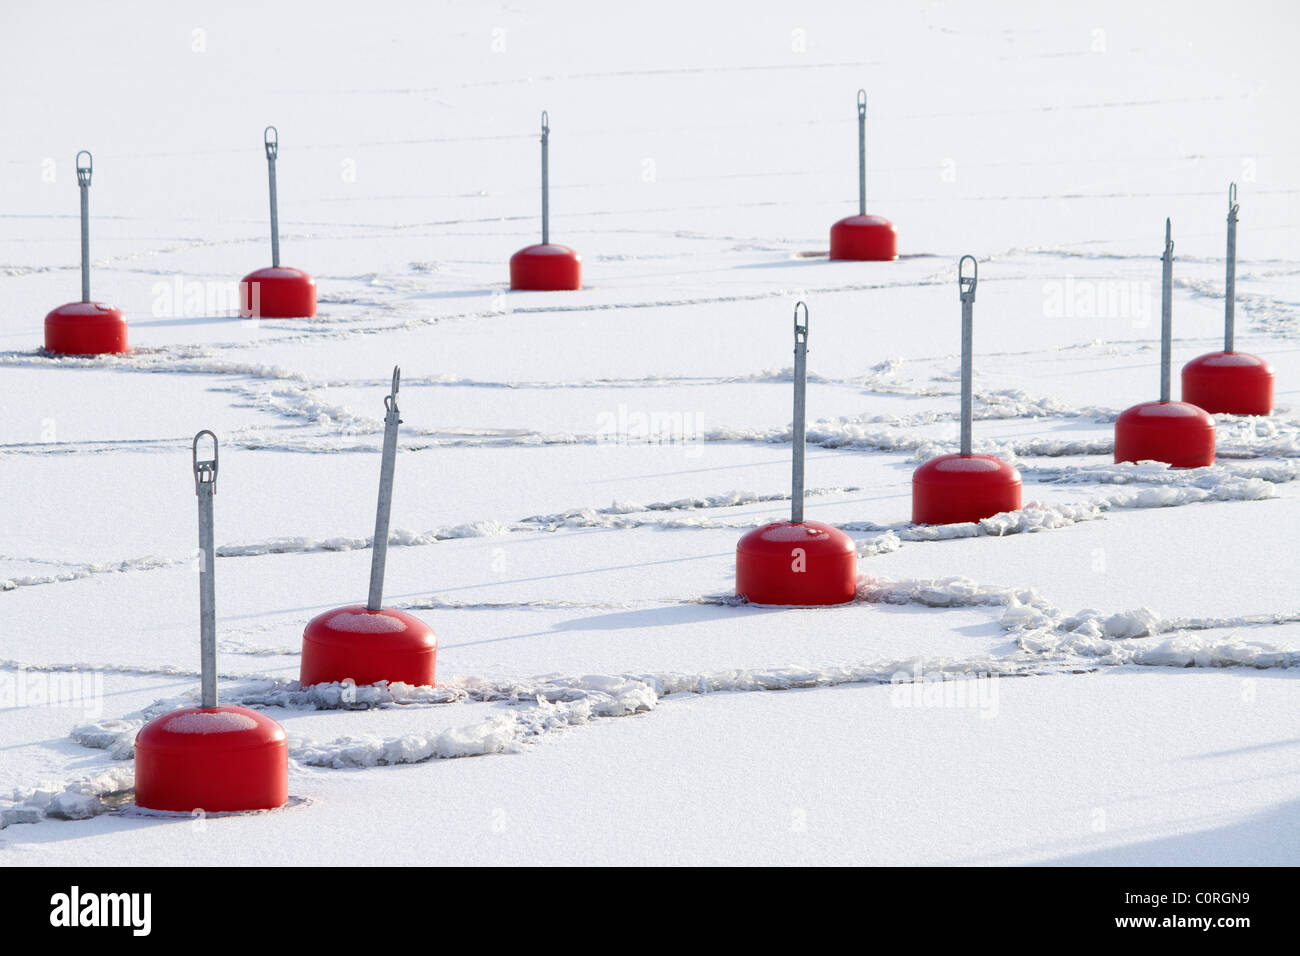 Red buoys in a frozen bay Stock Photo